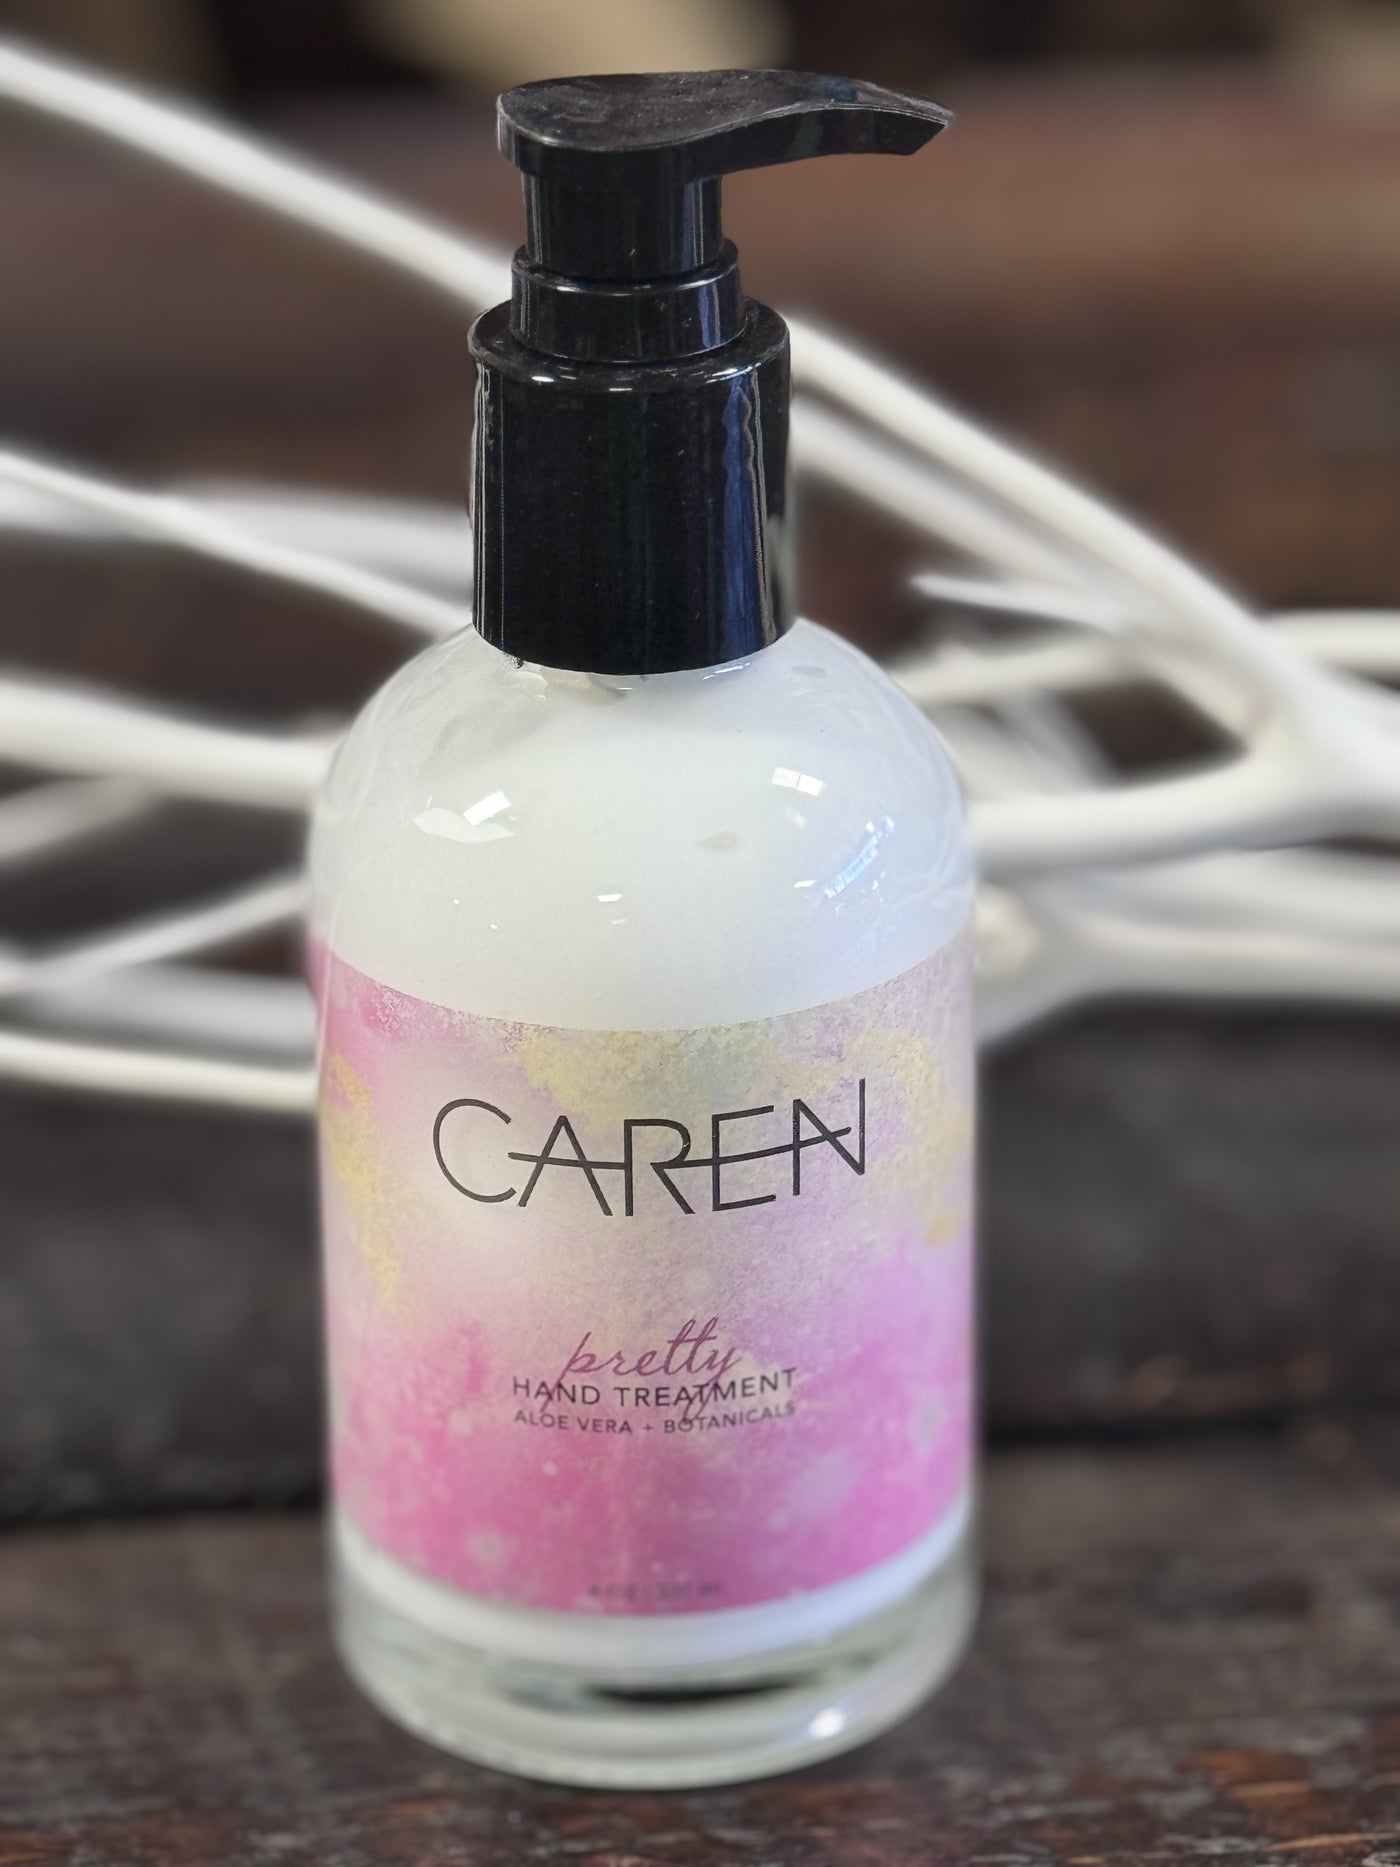 Front View. Caren 8 oz Hand Treatment Lotion-Bath & Beauty-Caren Products-Market Street Nest, Fashionable Clothing, Shoes and Home Décor Located in Mabank, TX